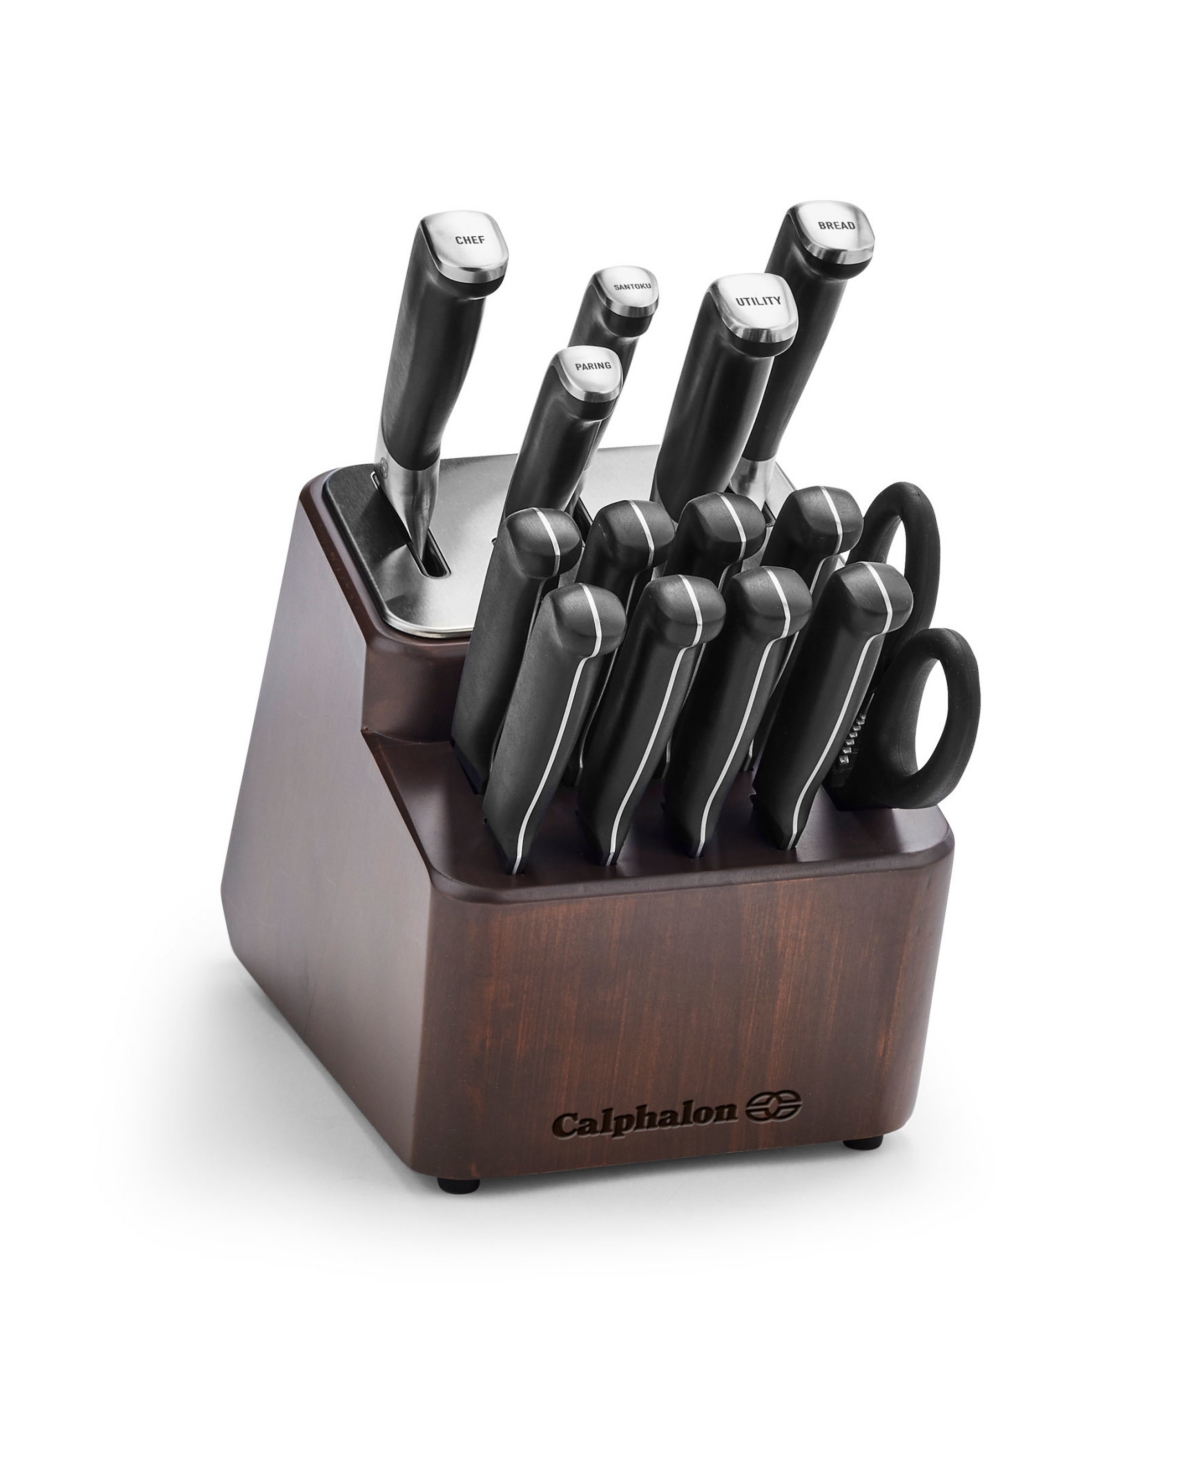 Calphalon Premier Stainless Steel 15-piece Sharpin Knife Set With Sharpening Block In Black